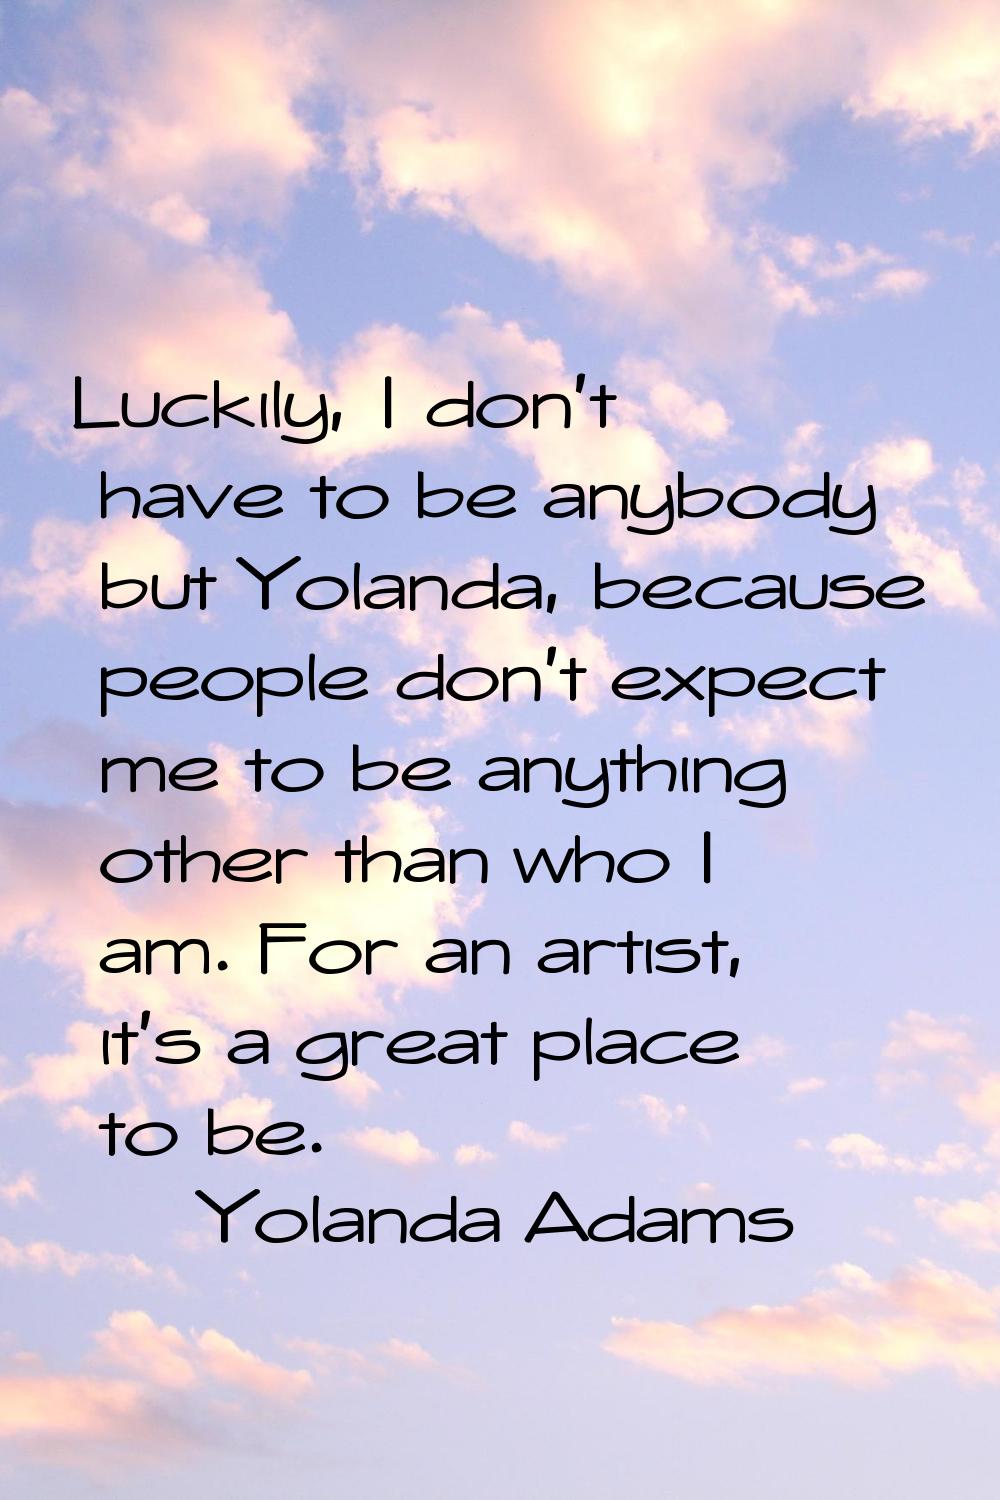 Luckily, I don't have to be anybody but Yolanda, because people don't expect me to be anything othe